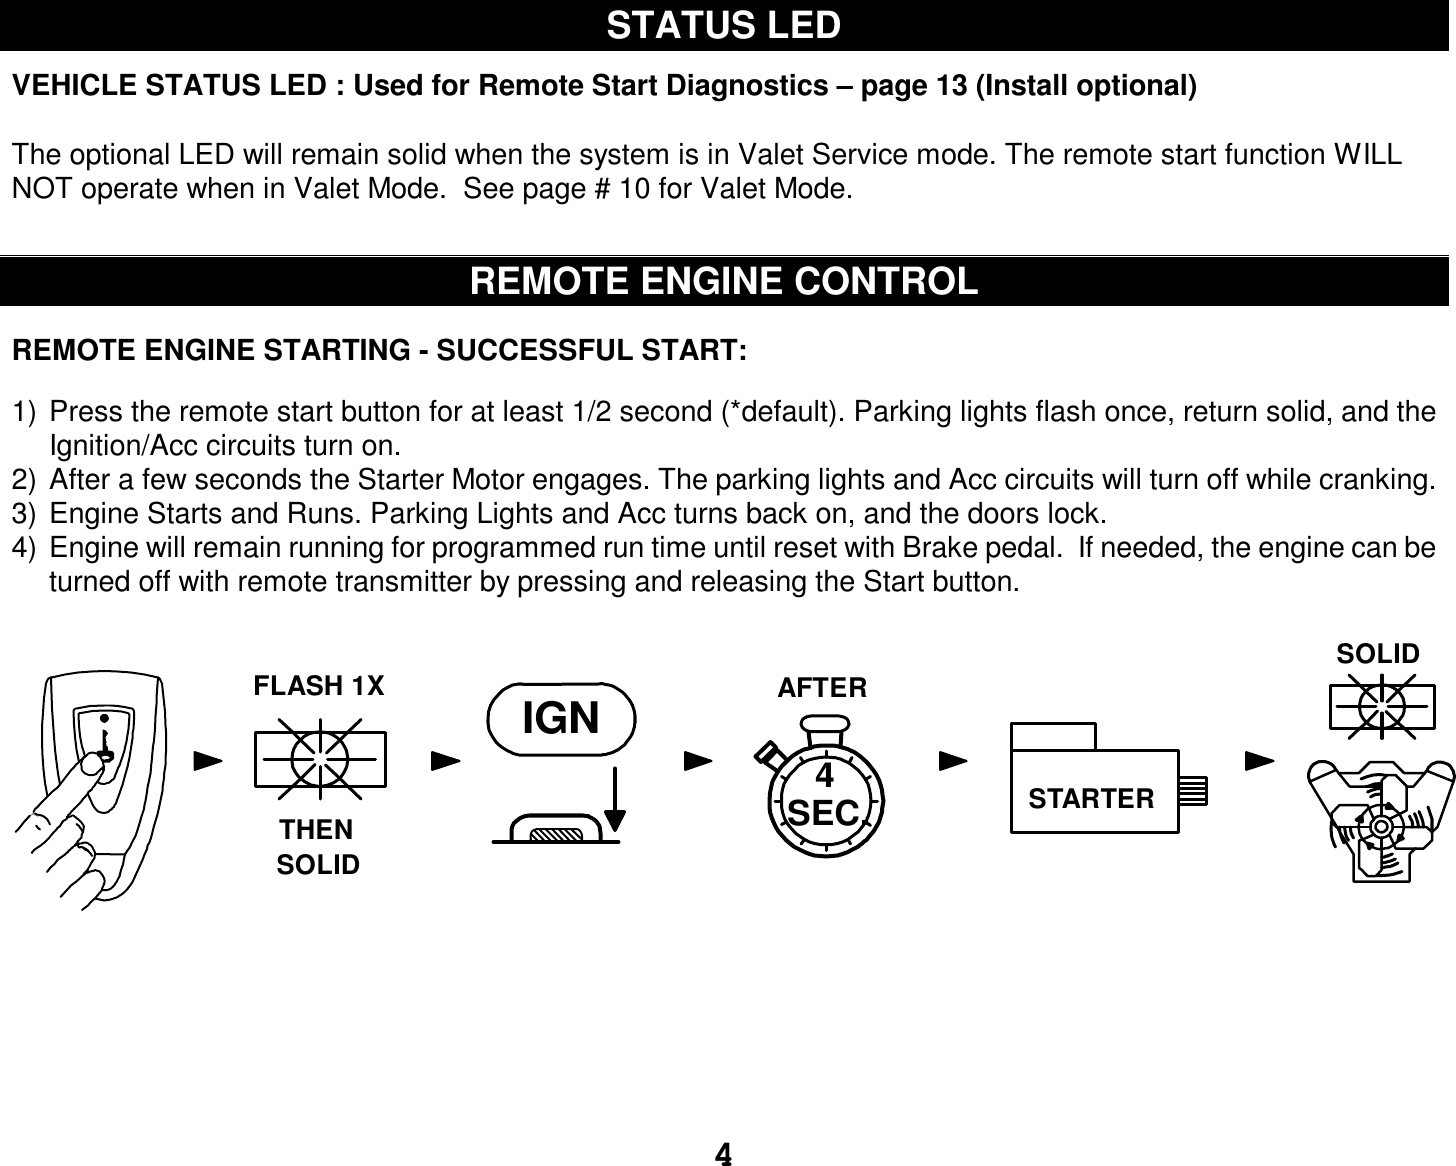  4 STATUS LED  VEHICLE STATUS LED : Used for Remote Start Diagnostics – page 13 (Install optional)  The optional LED will remain solid when the system is in Valet Service mode. The remote start function WILL NOT operate when in Valet Mode.  See page # 10 for Valet Mode.   REMOTE ENGINE CONTROL  REMOTE ENGINE STARTING - SUCCESSFUL START:  1) Press the remote start button for at least 1/2 second (*default). Parking lights flash once, return solid, and the Ignition/Acc circuits turn on. 2) After a few seconds the Starter Motor engages. The parking lights and Acc circuits will turn off while cranking. 3) Engine Starts and Runs. Parking Lights and Acc turns back on, and the doors lock. 4) Engine will remain running for programmed run time until reset with Brake pedal.  If needed, the engine can be turned off with remote transmitter by pressing and releasing the Start button.  AFTERIGN4STARTERTHENFLASH 1XSOLIDSOLIDSEC.      